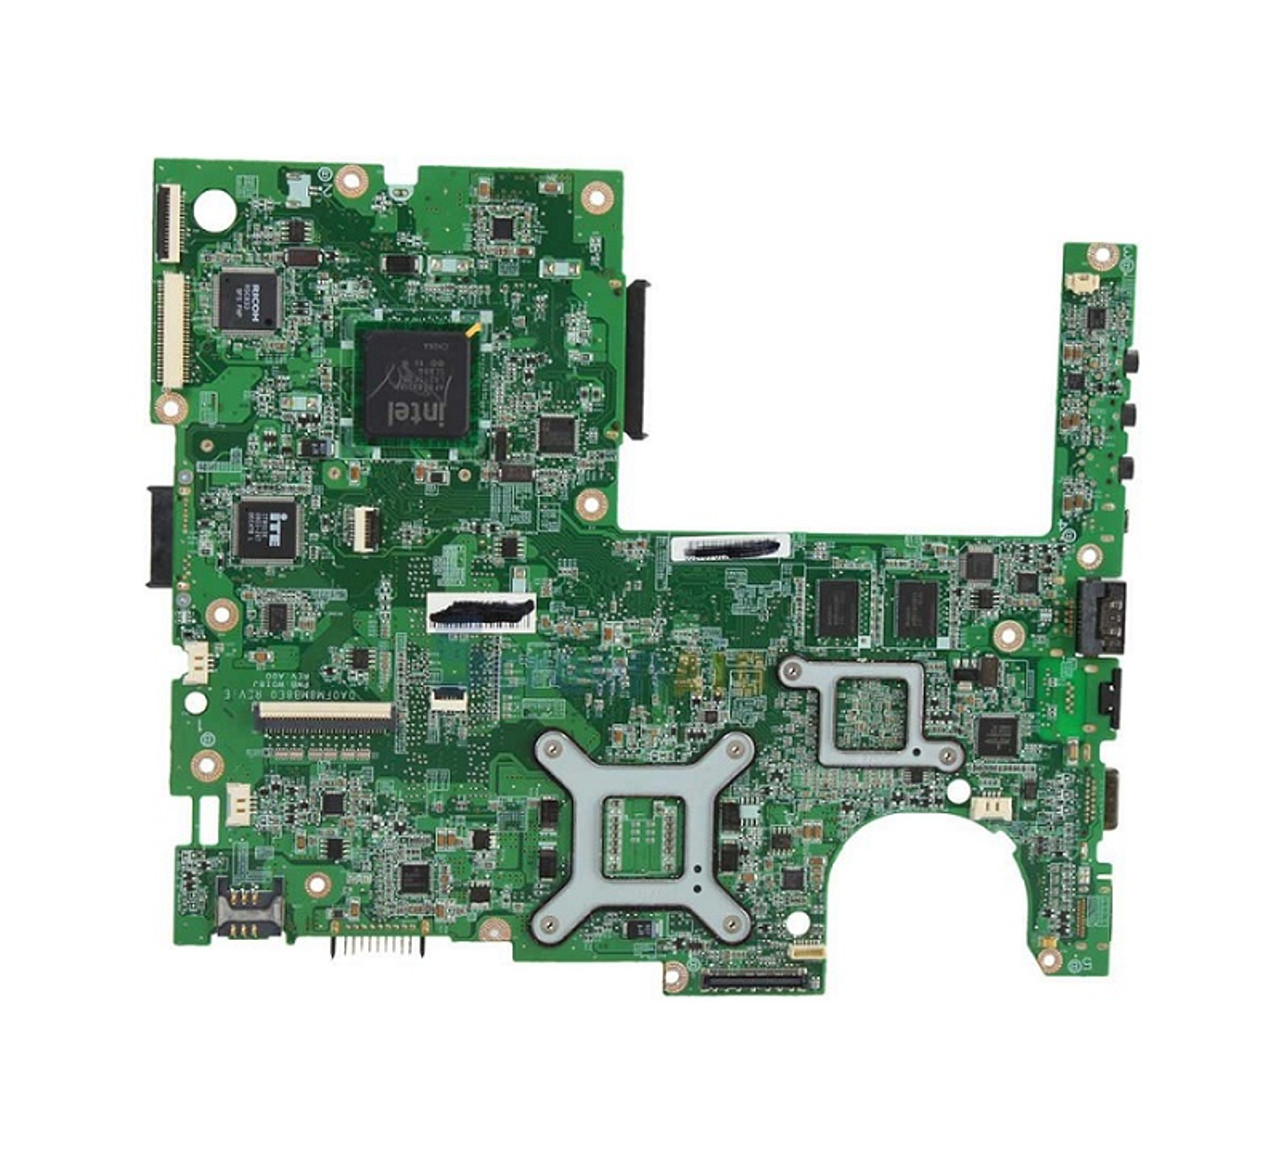 683535-001 - HP System Board for Dm1-4200 Laptop Motheboard with AMD E1-1200 1.4GHz Cpu (Refurbished)